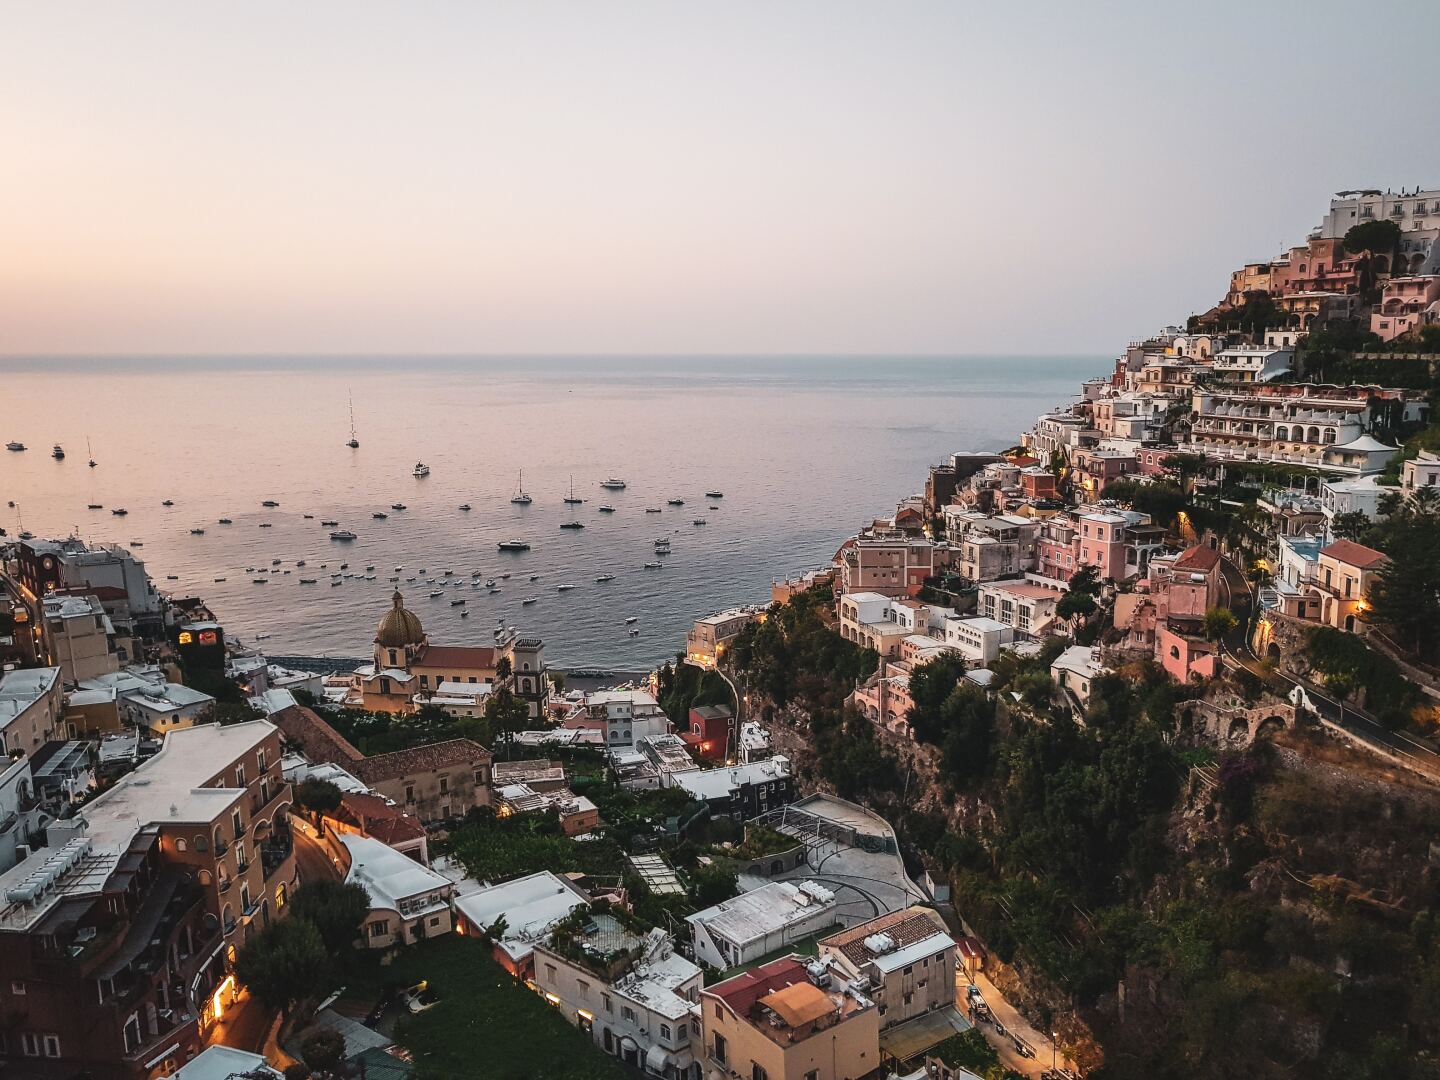 <h3>Amalfi Coast</h3> <p>Along the famed <a class="Link" href="https://www.afar.com/travel-guides/italy/amalfi-coast/guide">Amalfi Coast</a>, ships visit Sorrento, overlooking the bay of Naples, and colorful Amalfi, dramatically backed by steep cliffs. Some itineraries also including the strikingly beautiful Positano. Smaller yacht vessels may sail directly to the fancy island of Capri (otherwise there will be a shore excursion, as with the larger ships). Among other shore choices in this region is a visit to ancient Pompeii.</p> <p><b>Sicily</b></p> <p>Italy cruise itineraries often land at several ports on Sicily, and some itineraries circumnavigate the island. Each port has its own allure, including the city scene in Palermo; Syracuse, which showcases ancient attractions from when it was a prominent Greek city; Taormina, with its impressive hilltop location and Greek theater; and Lipari, which has a charming, tiny island ambience. In addition to striking landscapes, attractions include Roman and Greek ancient historic sights and views of Mount Etna, plus filming locations featured in <i>The Godfather</i> movies and in Season 2 of the HBO series <a class="Link" href="https://www.afar.com/magazine/white-lotus-season-2-filming-locations-you-can-visit"><i>The White Lotus</i></a>. If while cruising Sicily your ship ventures to Stromboli, with its famous volcano, it will be from a safe distance—and if you’re lucky, in the dark when you can witness the lava flowing.</p> <h3>Puglia</h3> <p>Increasingly popular on the cruise map are destinations in <a class="Link" href="https://www.afar.com/magazine/the-best-way-to-discover-italys-unspoiled-province">Puglia</a>, a region of olive groves and national parks. Small ships call in the city of Lecce and town of Gallipoli, with their impressive baroque architecture; Taranto, a bustling port city with a history dating back to the Spartans and known for its fresh seafood restaurants; the town of Otranto, where a chapel in the cathedral displays skulls of martyrs from a 15th-century Ottoman siege; and the scenic fishing town of Monopoli, with its beaches and castles.</p> <h3>Adriatic Coast and Sardinia</h3> <p>Small ships also visit Italy’s Adriatic Coast, including the historic Ancona, which has Roman ruins and beaches. Additional islands might appear on an Italy cruise itinerary, too, such as Sardinia, where the wild landscape affords hiking opportunities with views, and you can wander among medieval sights in the historic port city of Cagliari.</p> <h2>The best Italy cruises for every type of traveler</h2>